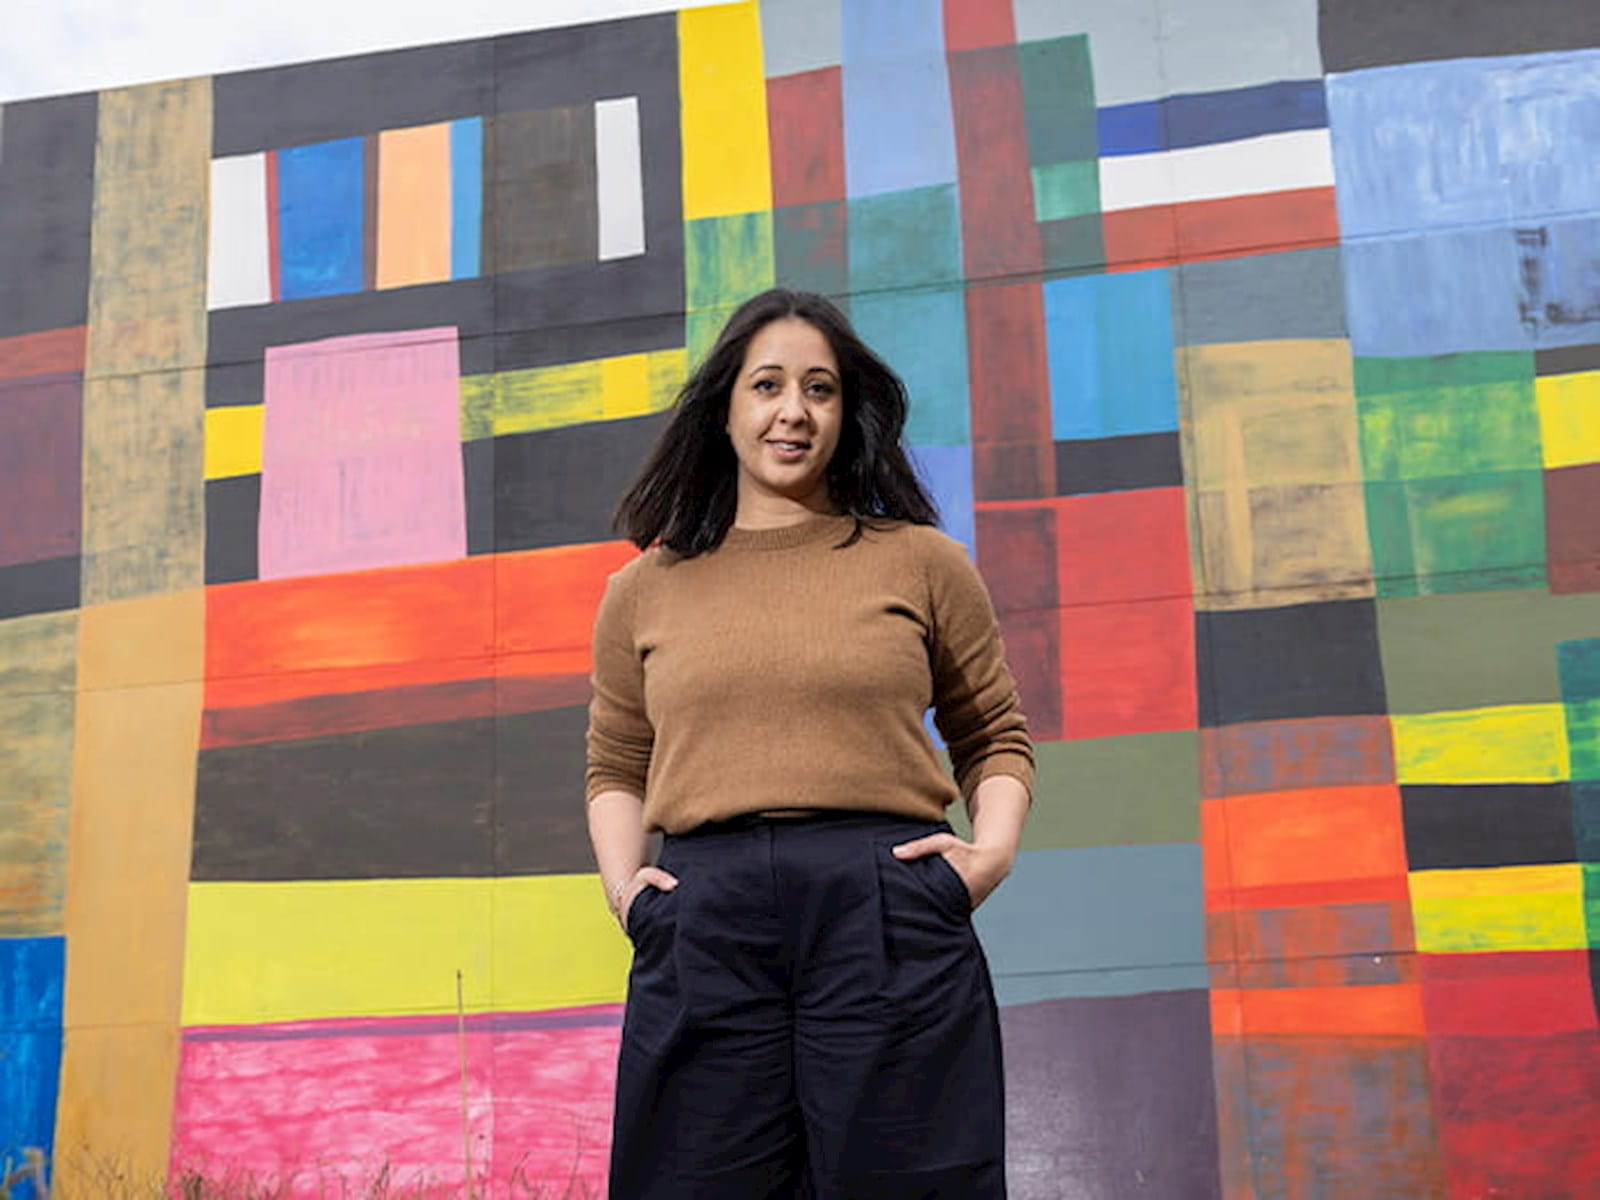 Alina Cummins, Head of Finance at Serpentine, young woman standing in front of wall mural colourful